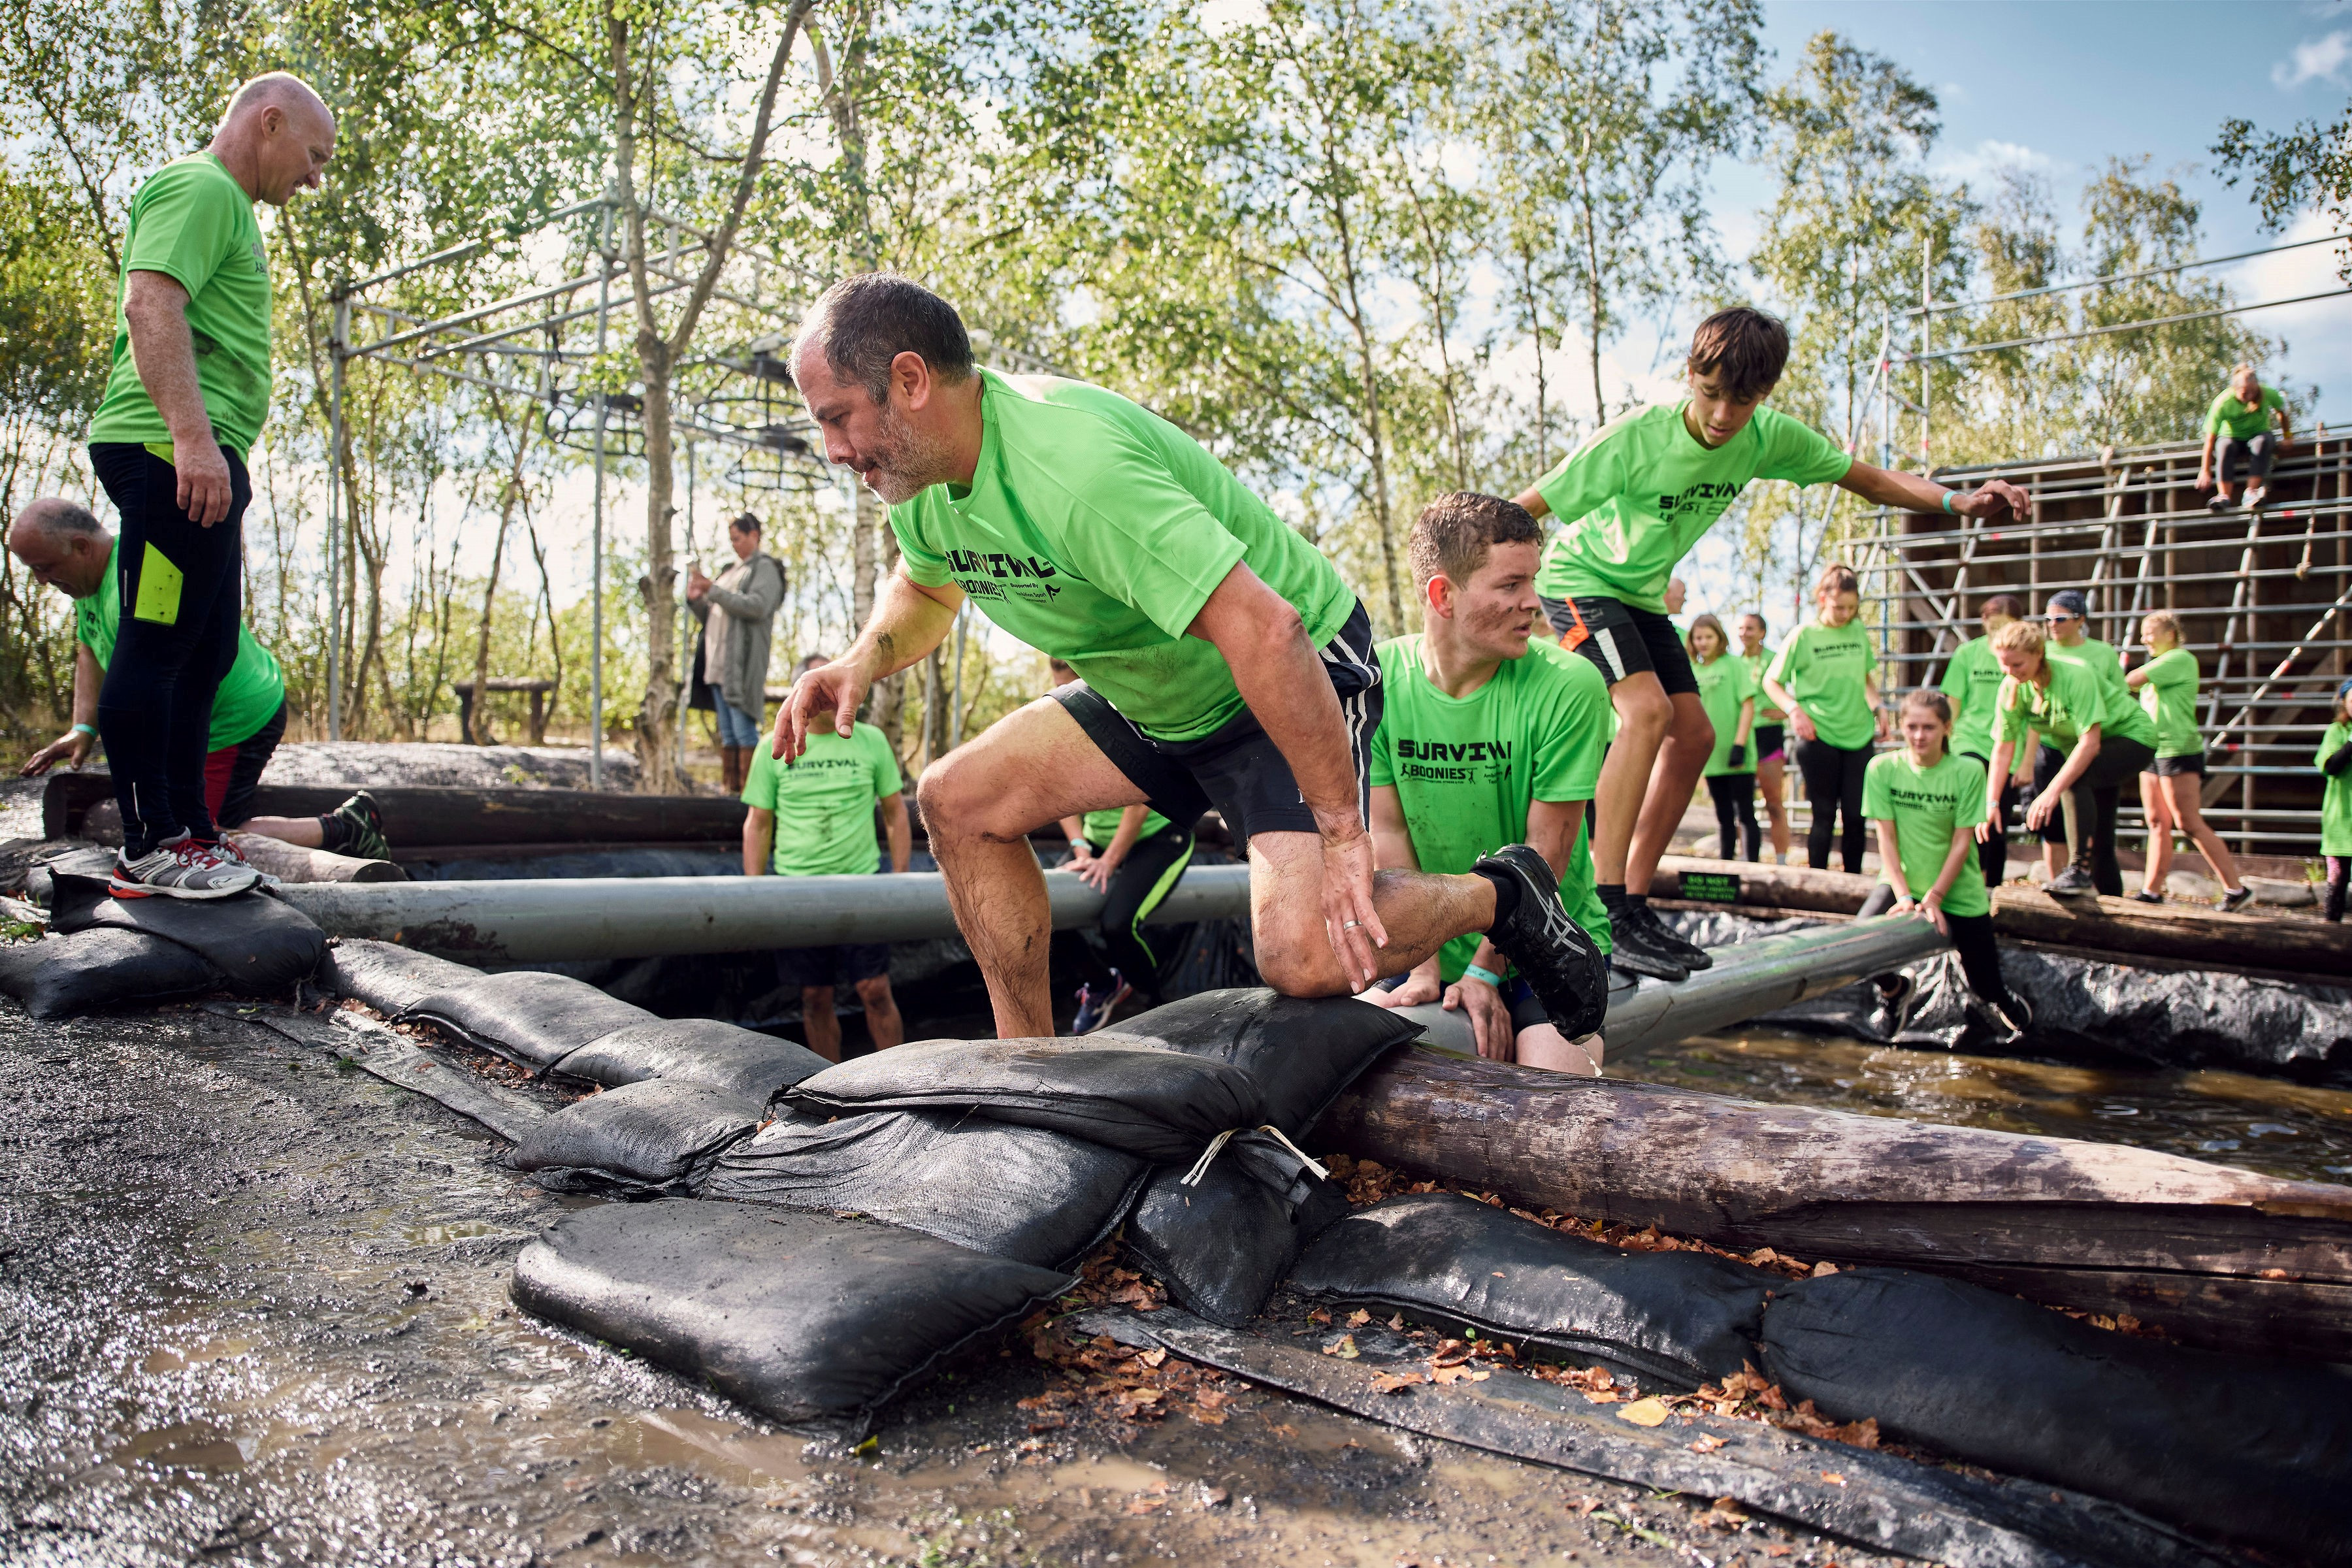 People take part in the Survival challenge at Betteshanger park. Image shows several people in green t-shirts tackling an obstacle that involves a log over a muddy put